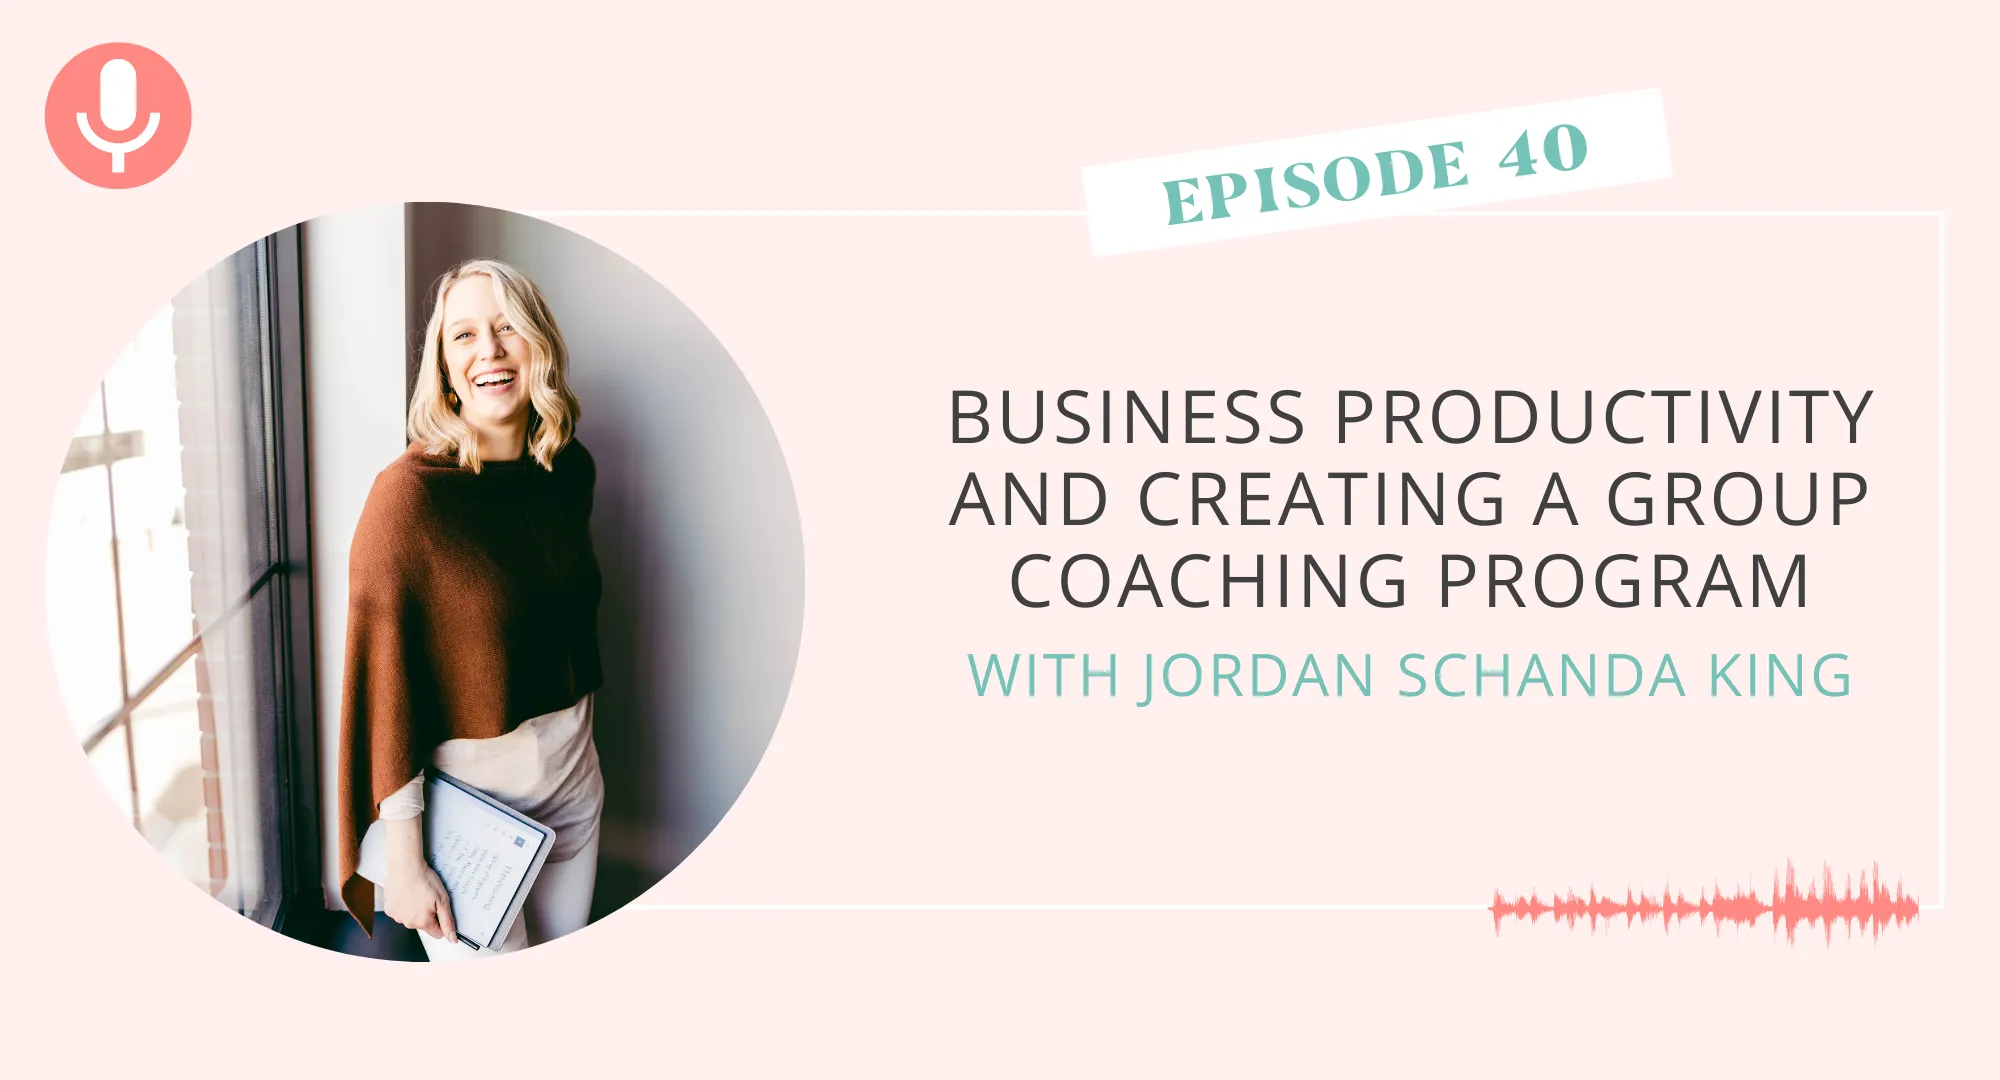 Business Productivity and Creating a Group Coaching Program